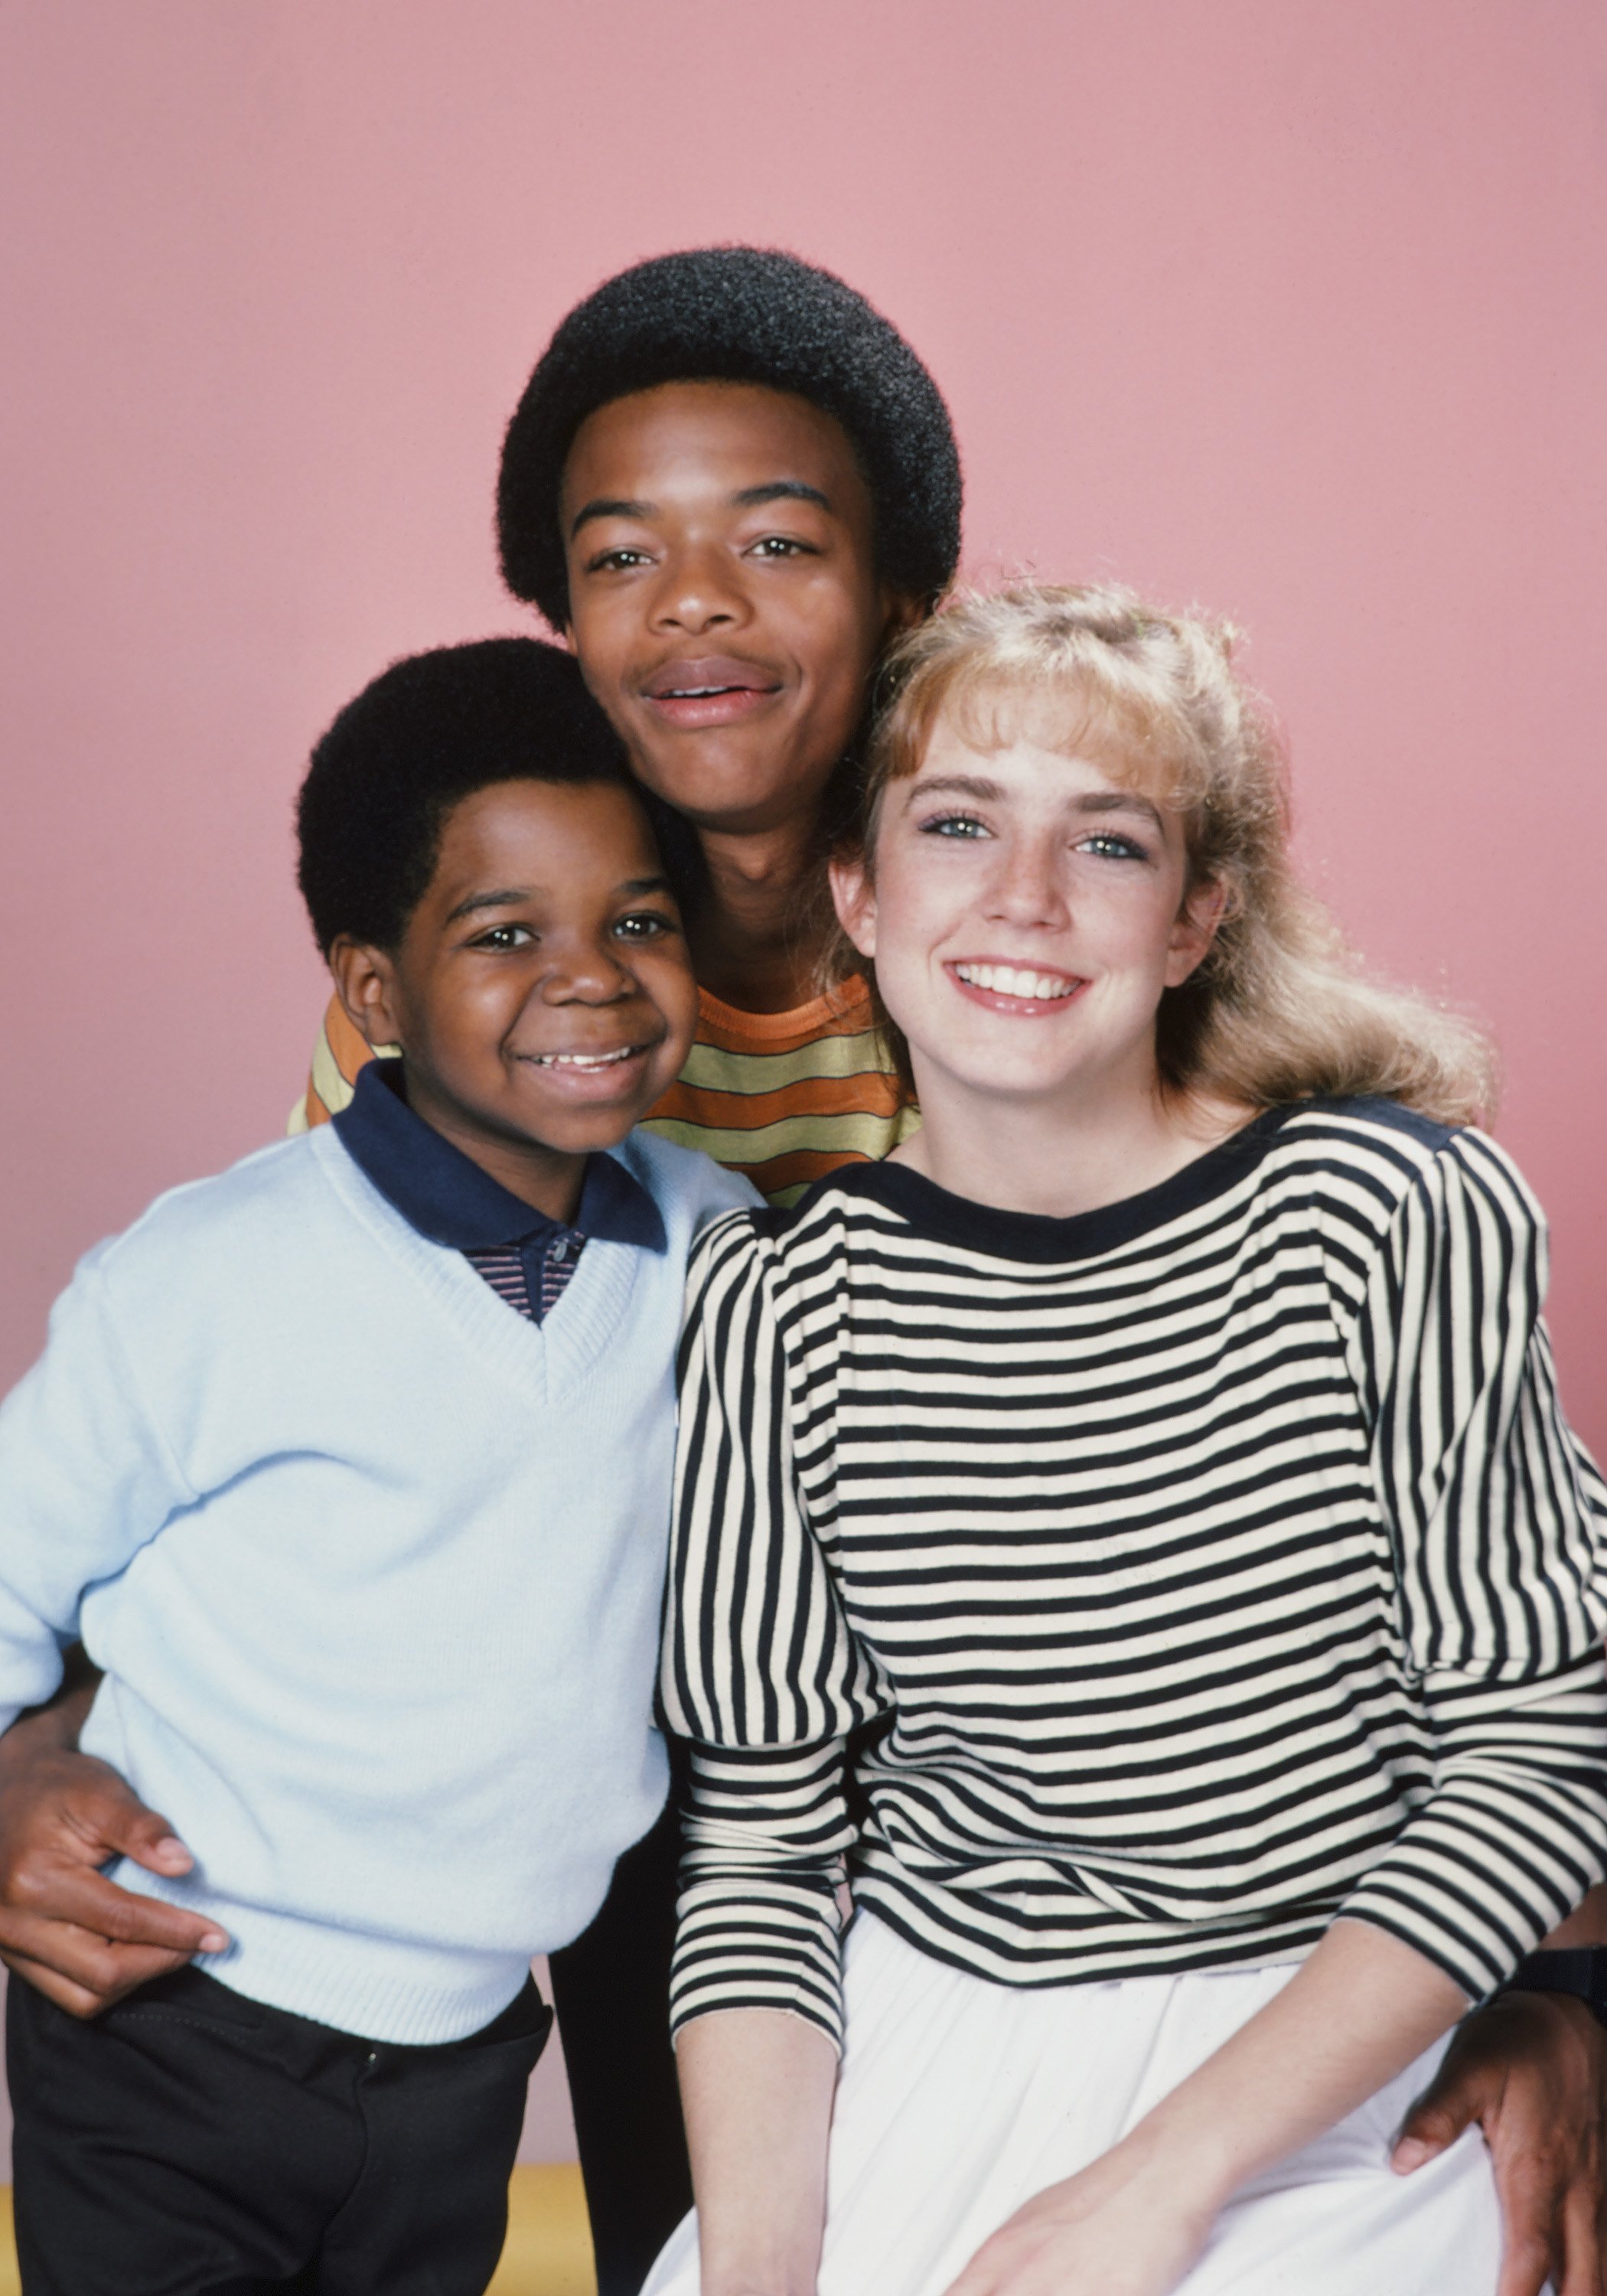 Gary Coleman, Todd Bridges, and Dana Plato during "Diff'rent Strokes" season 5 | Photo: Getty Images